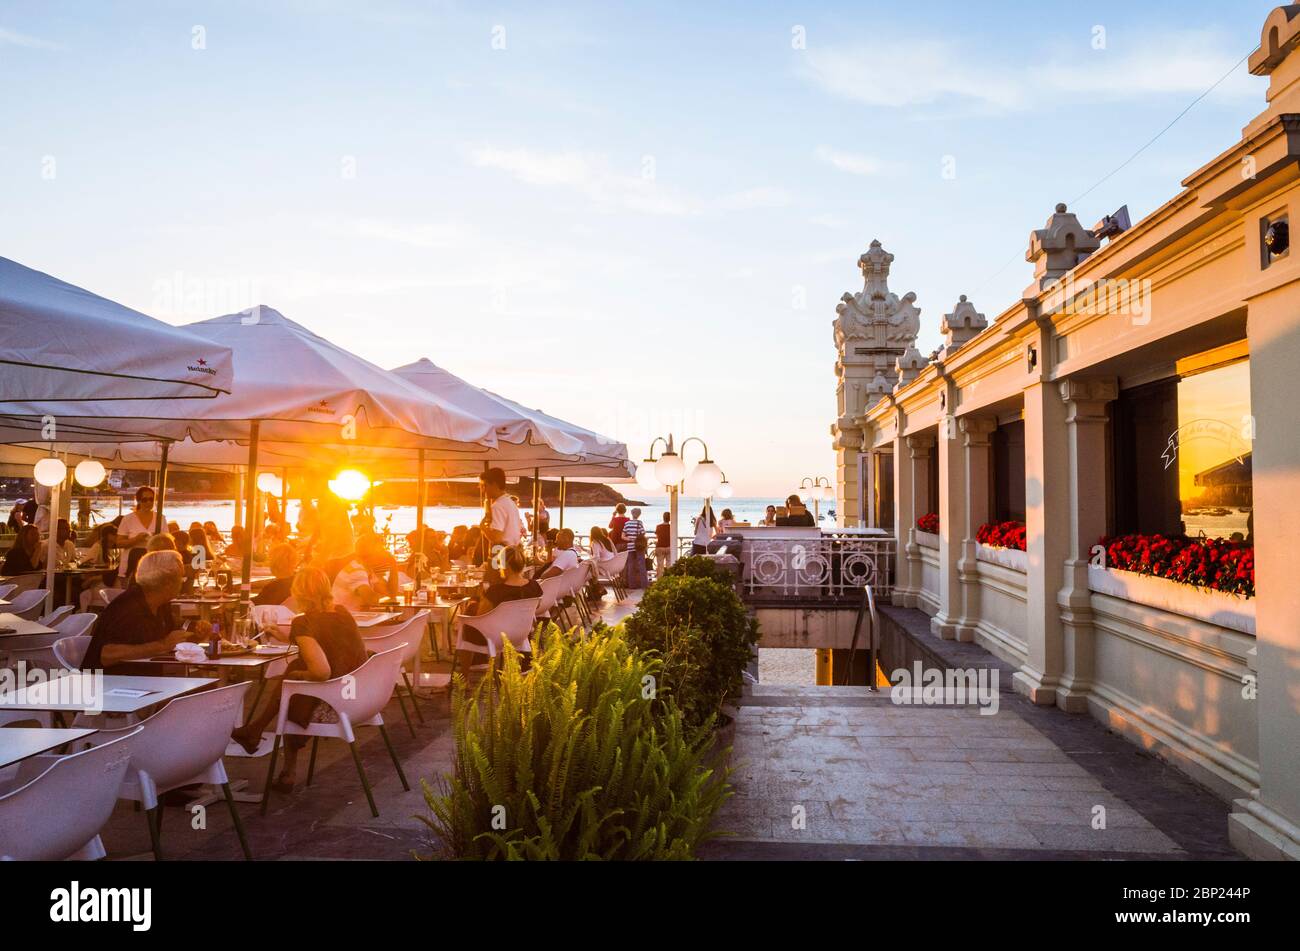 Donostia, Gipuzkoa, Basque Country, Spain - July 12th, 2019 : People relax at sunset in a chic sidewalk cafe in the promenade of La Concha beach. Stock Photo